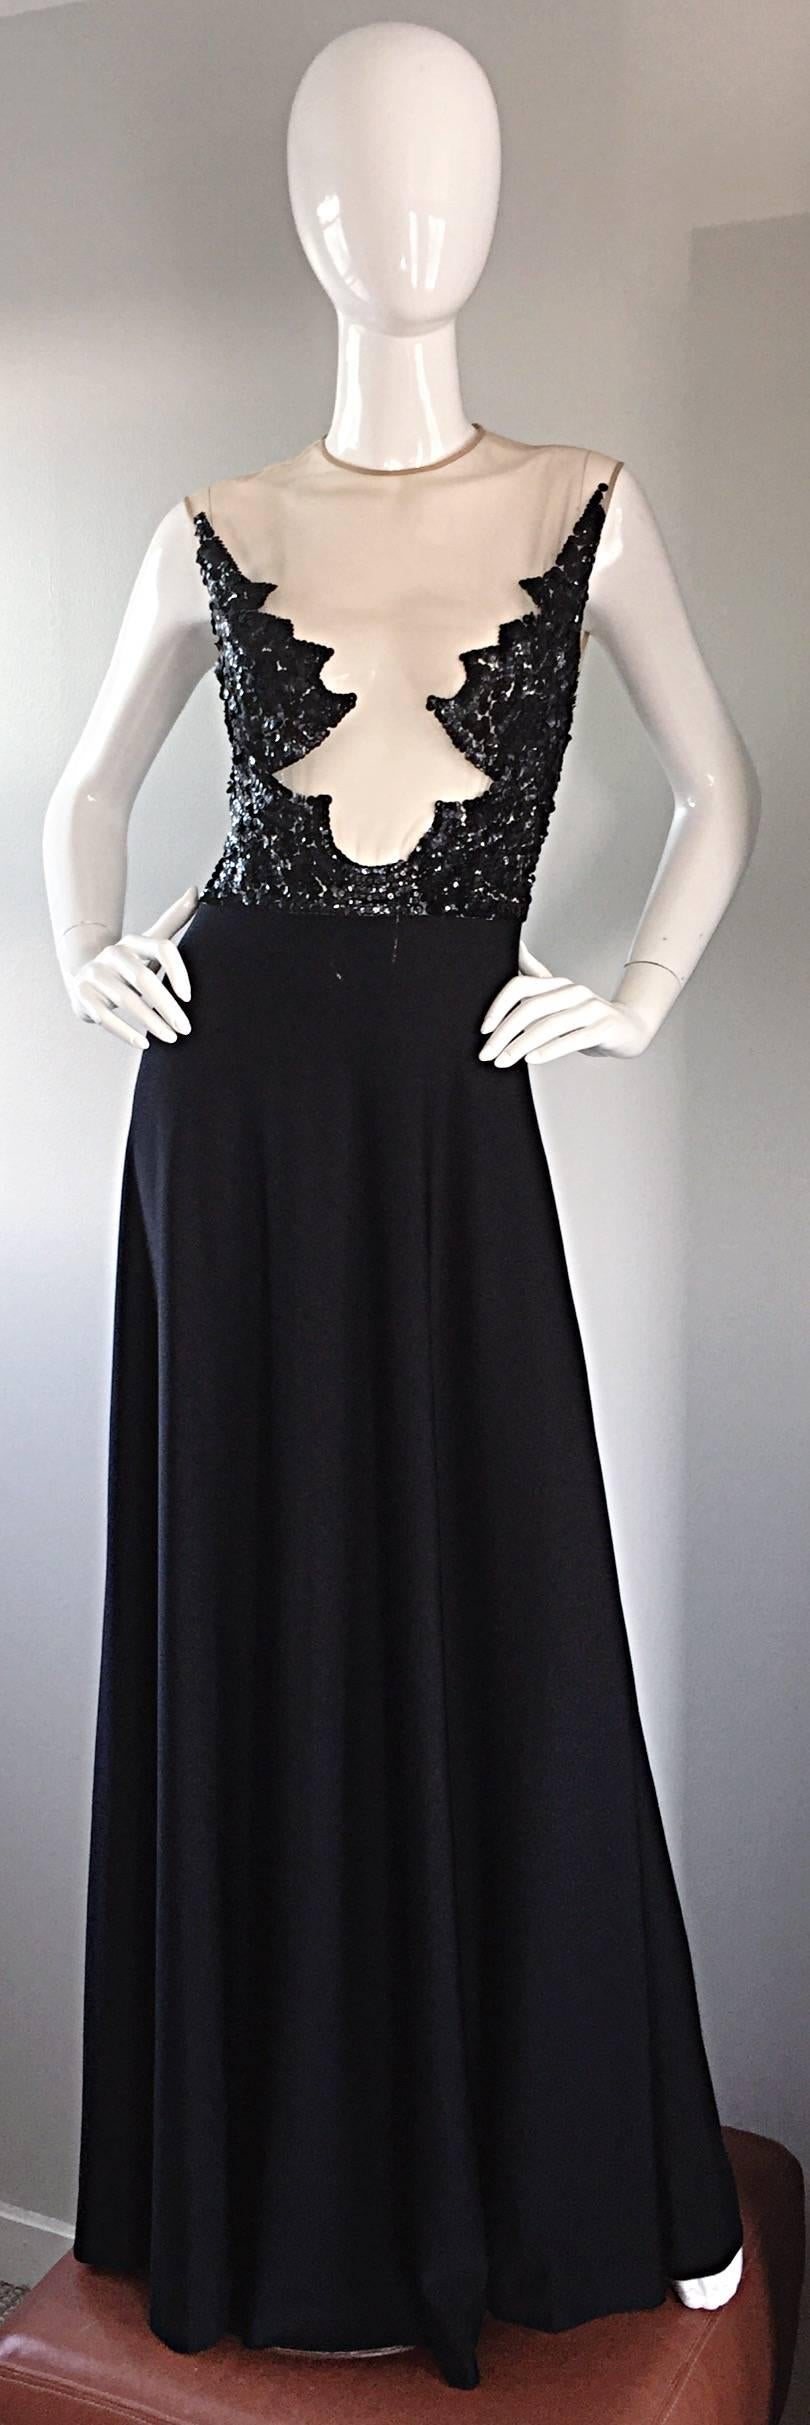 Absolutely incredible RARE 70s MR. BLACKWELL black vintage full length dress! Nude Illusion bodice, with strategically hand-sewn sequins, to cover just the right amount. Full black jersey skirt, with nude silk mesh on bodice, hand encrusted with